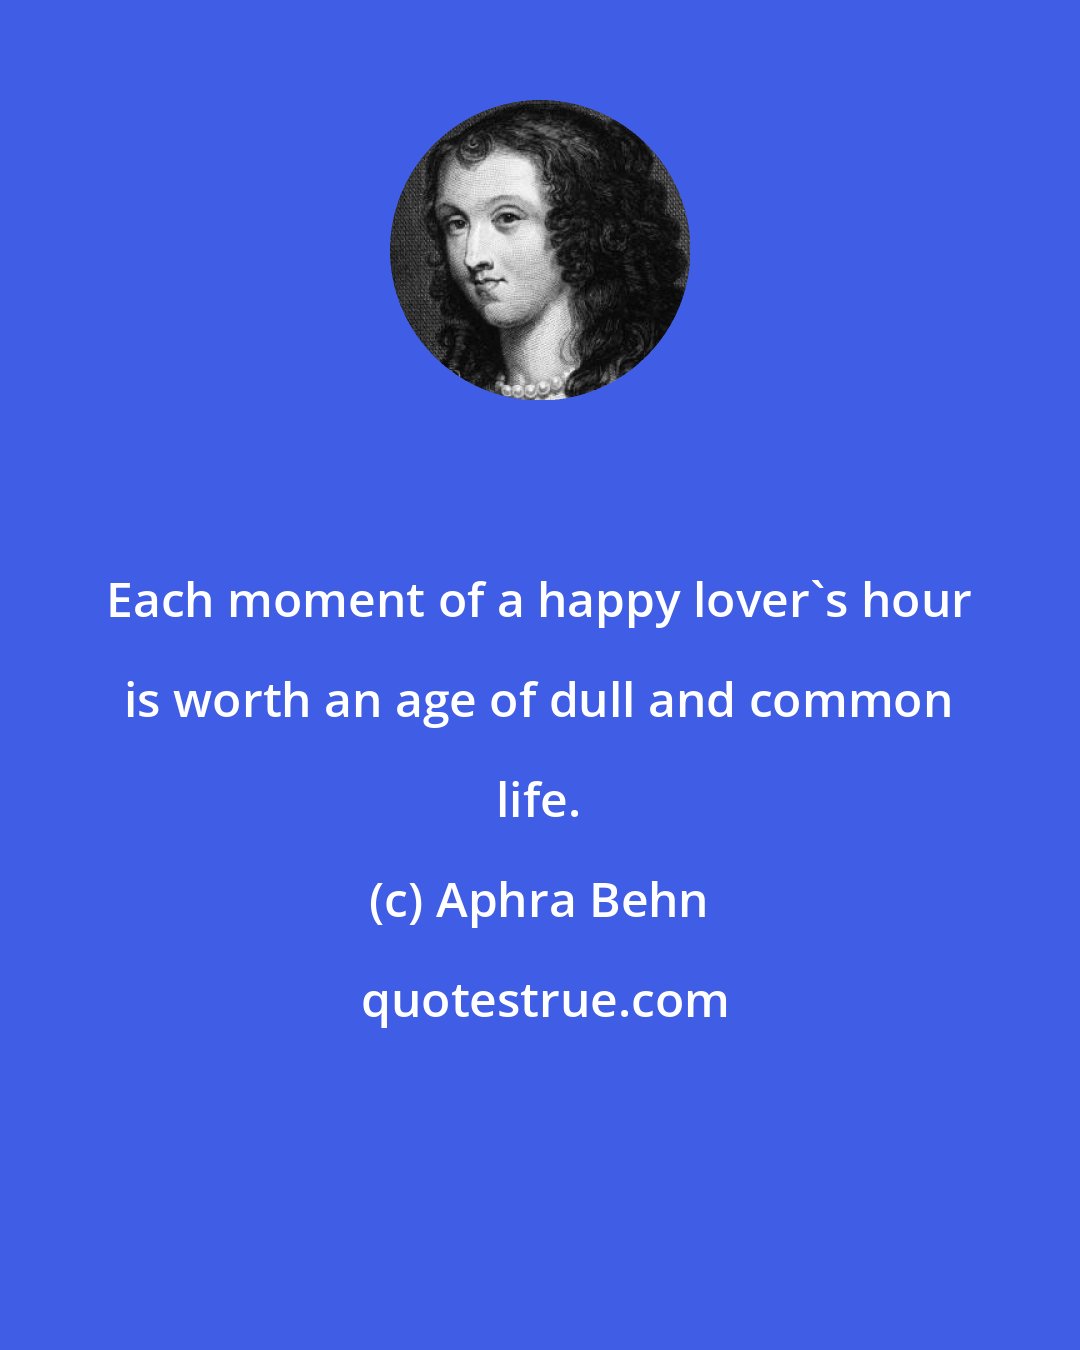 Aphra Behn: Each moment of a happy lover's hour is worth an age of dull and common life.